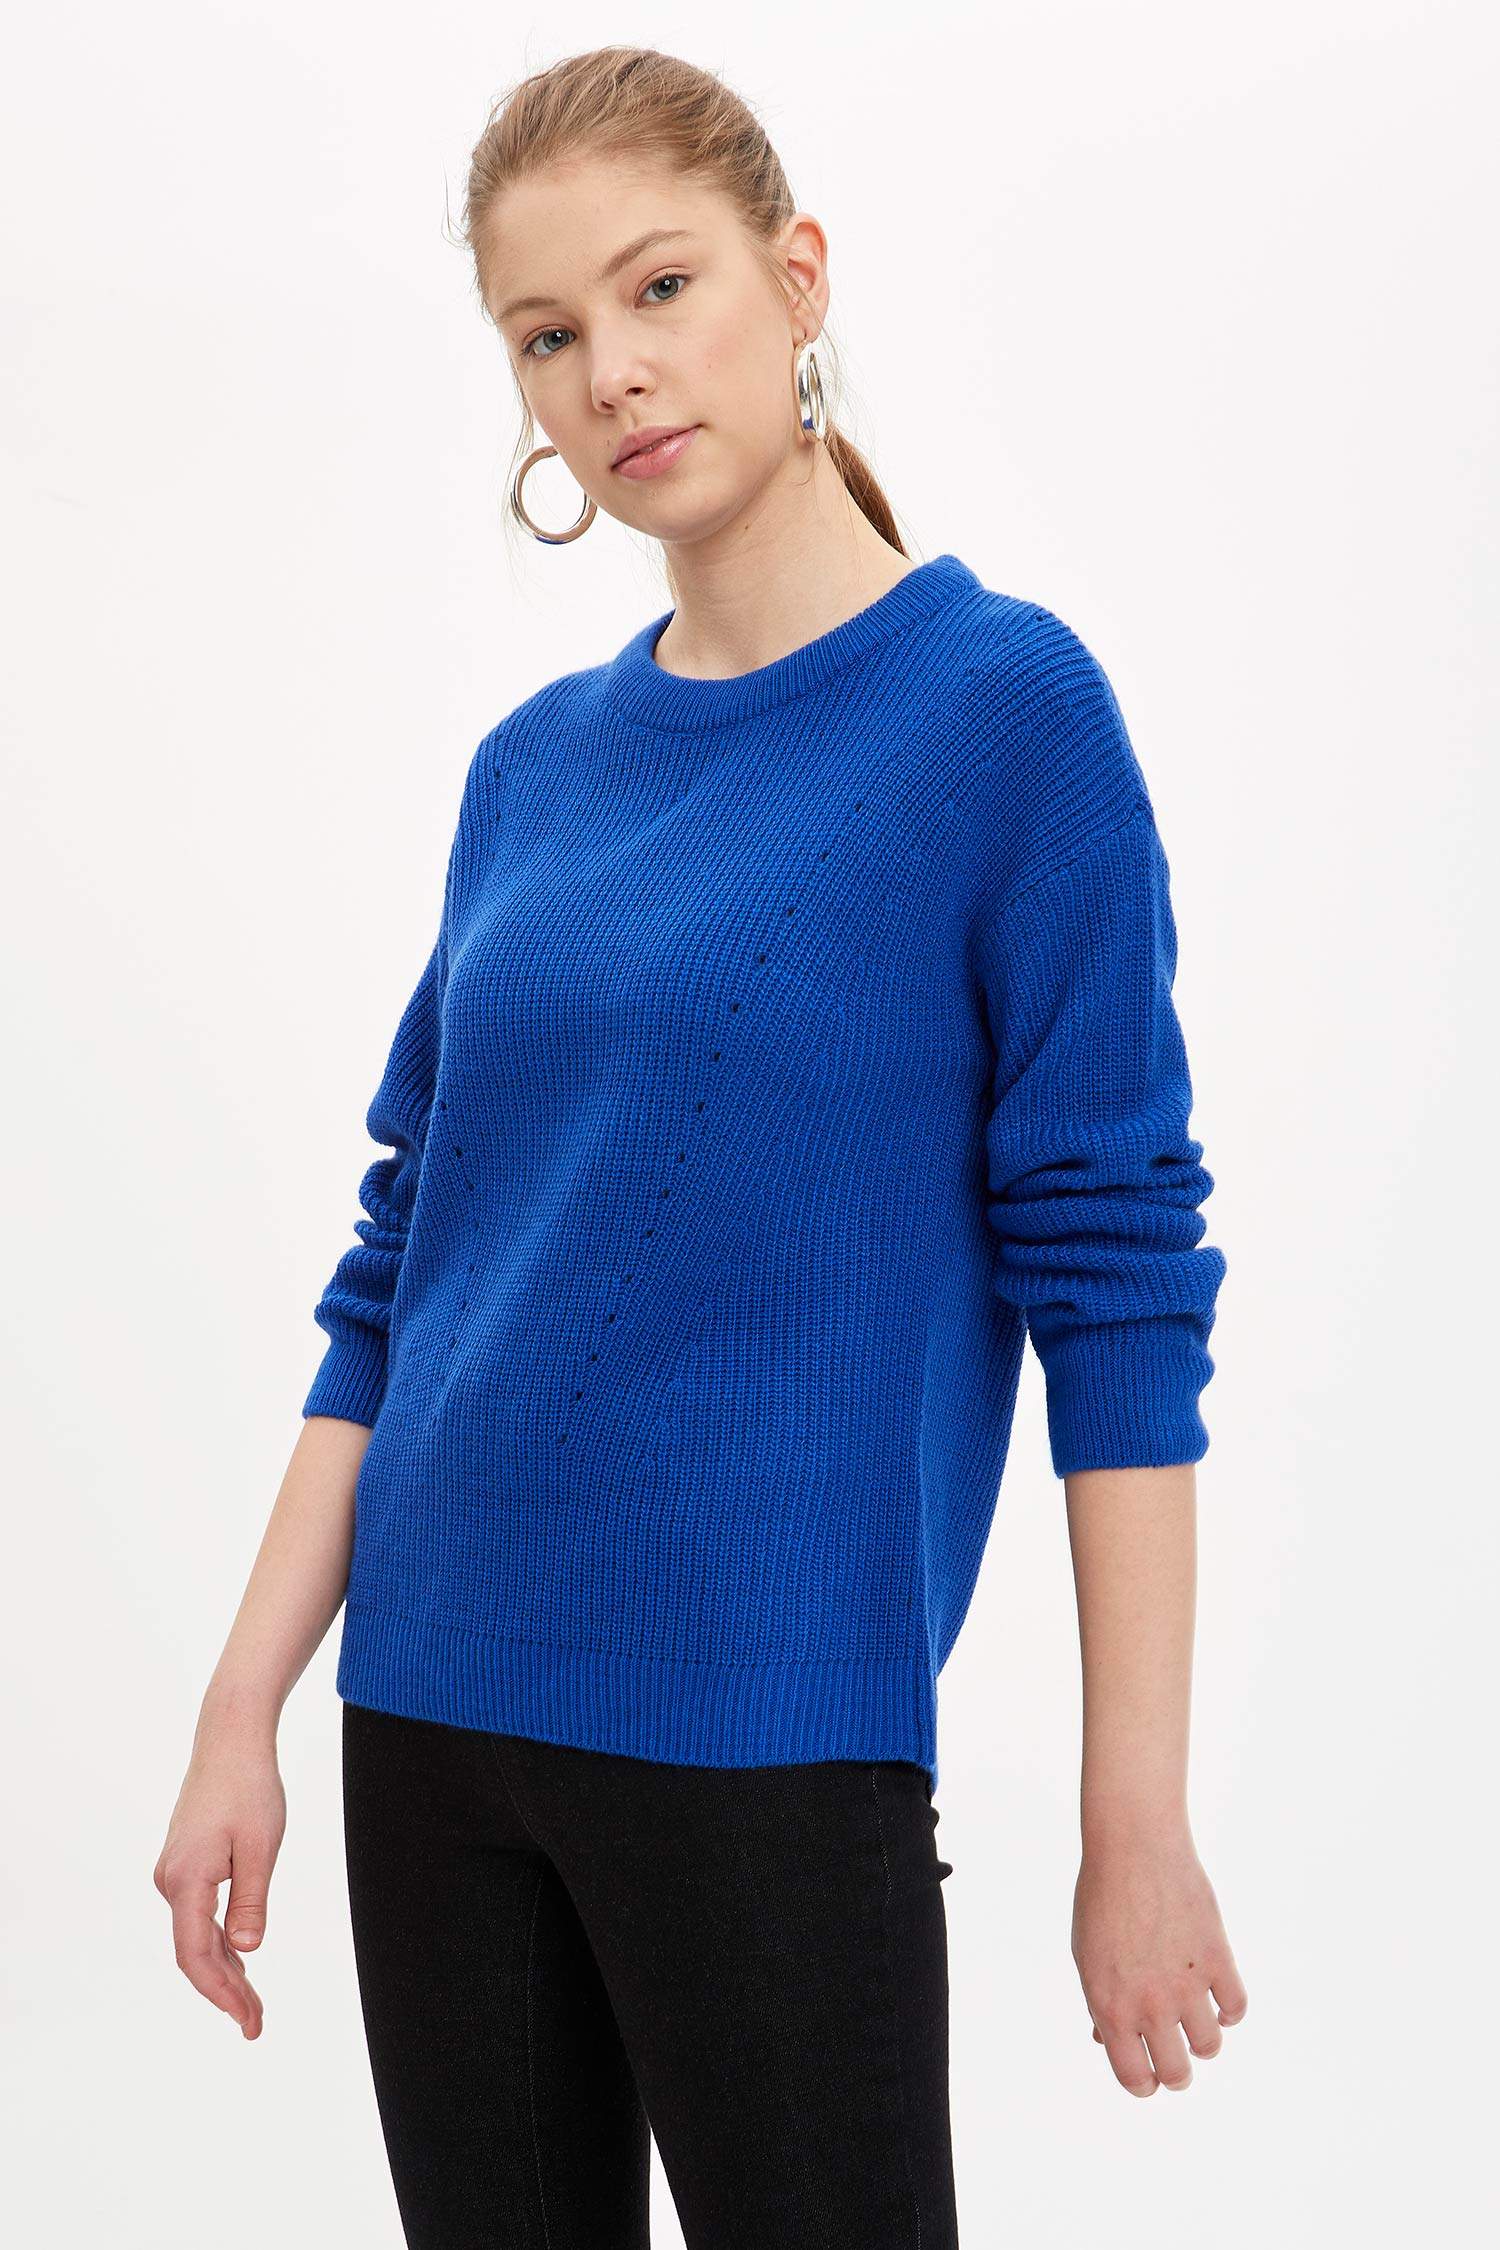 Blue WOMAN Regular Fit Crew Neck Tricot Pullover 1465649 | DeFacto